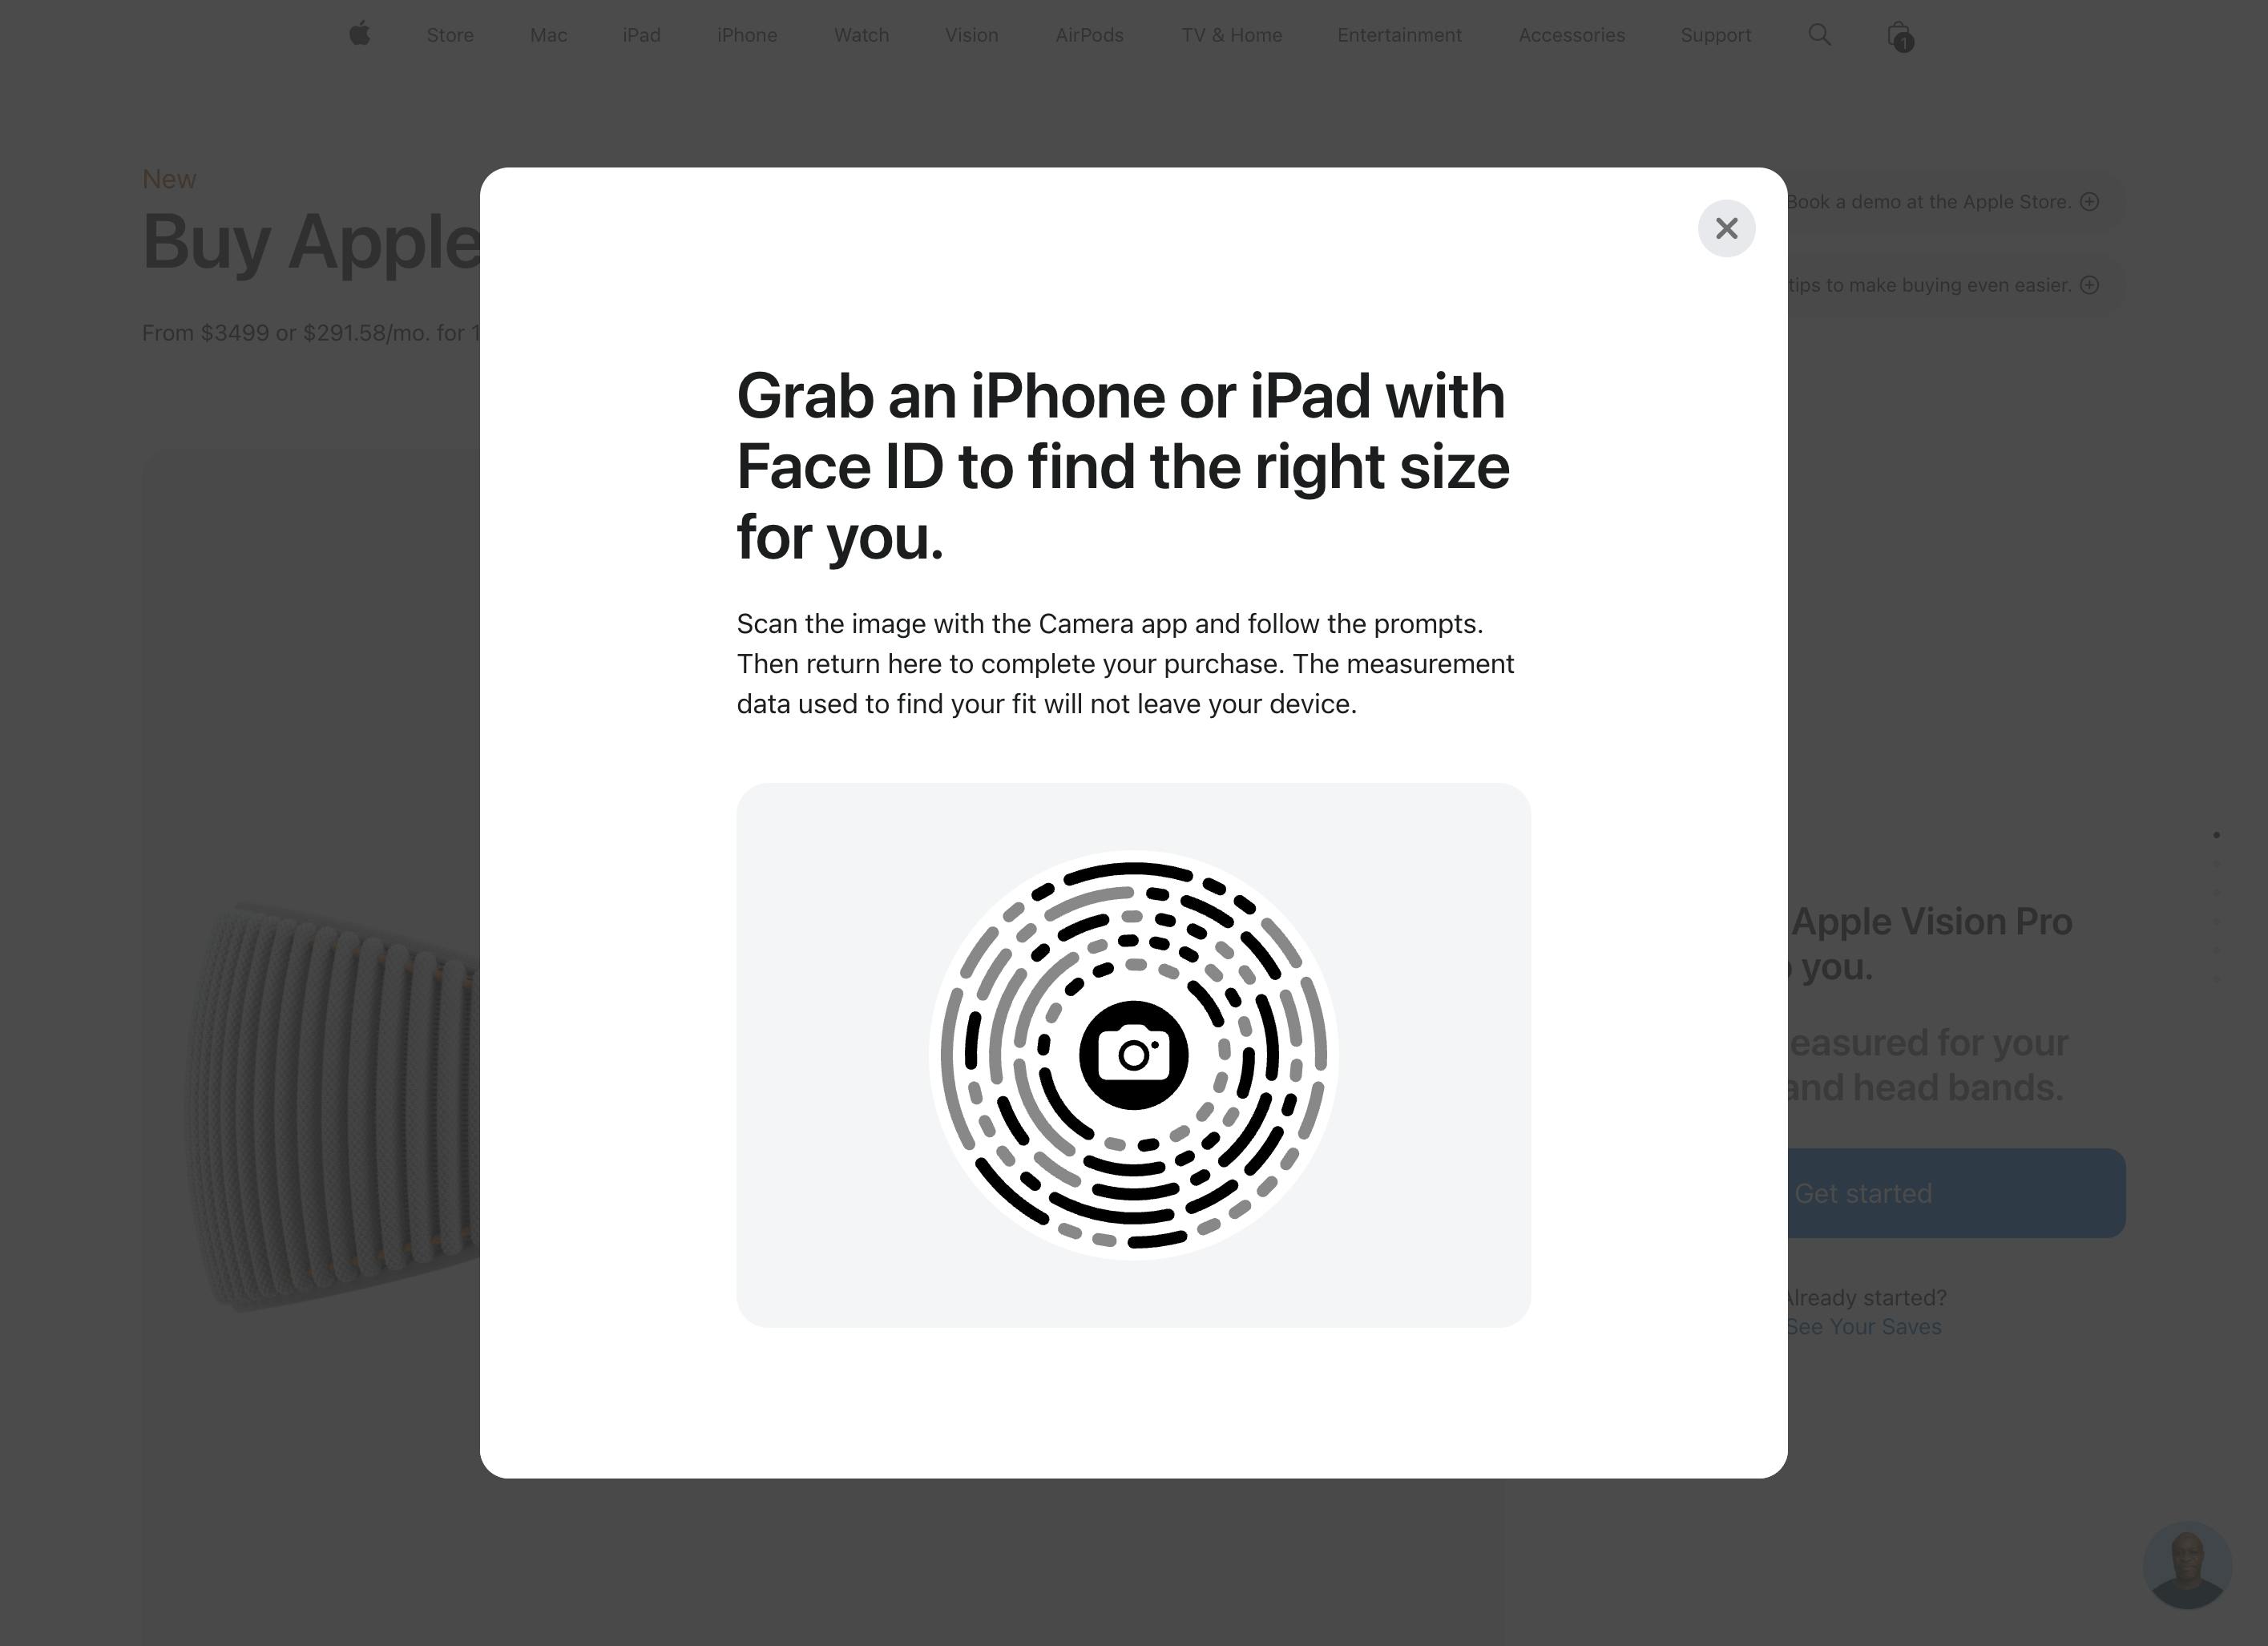 To order Apple Vision Pro from Apple US, you need to scan this image